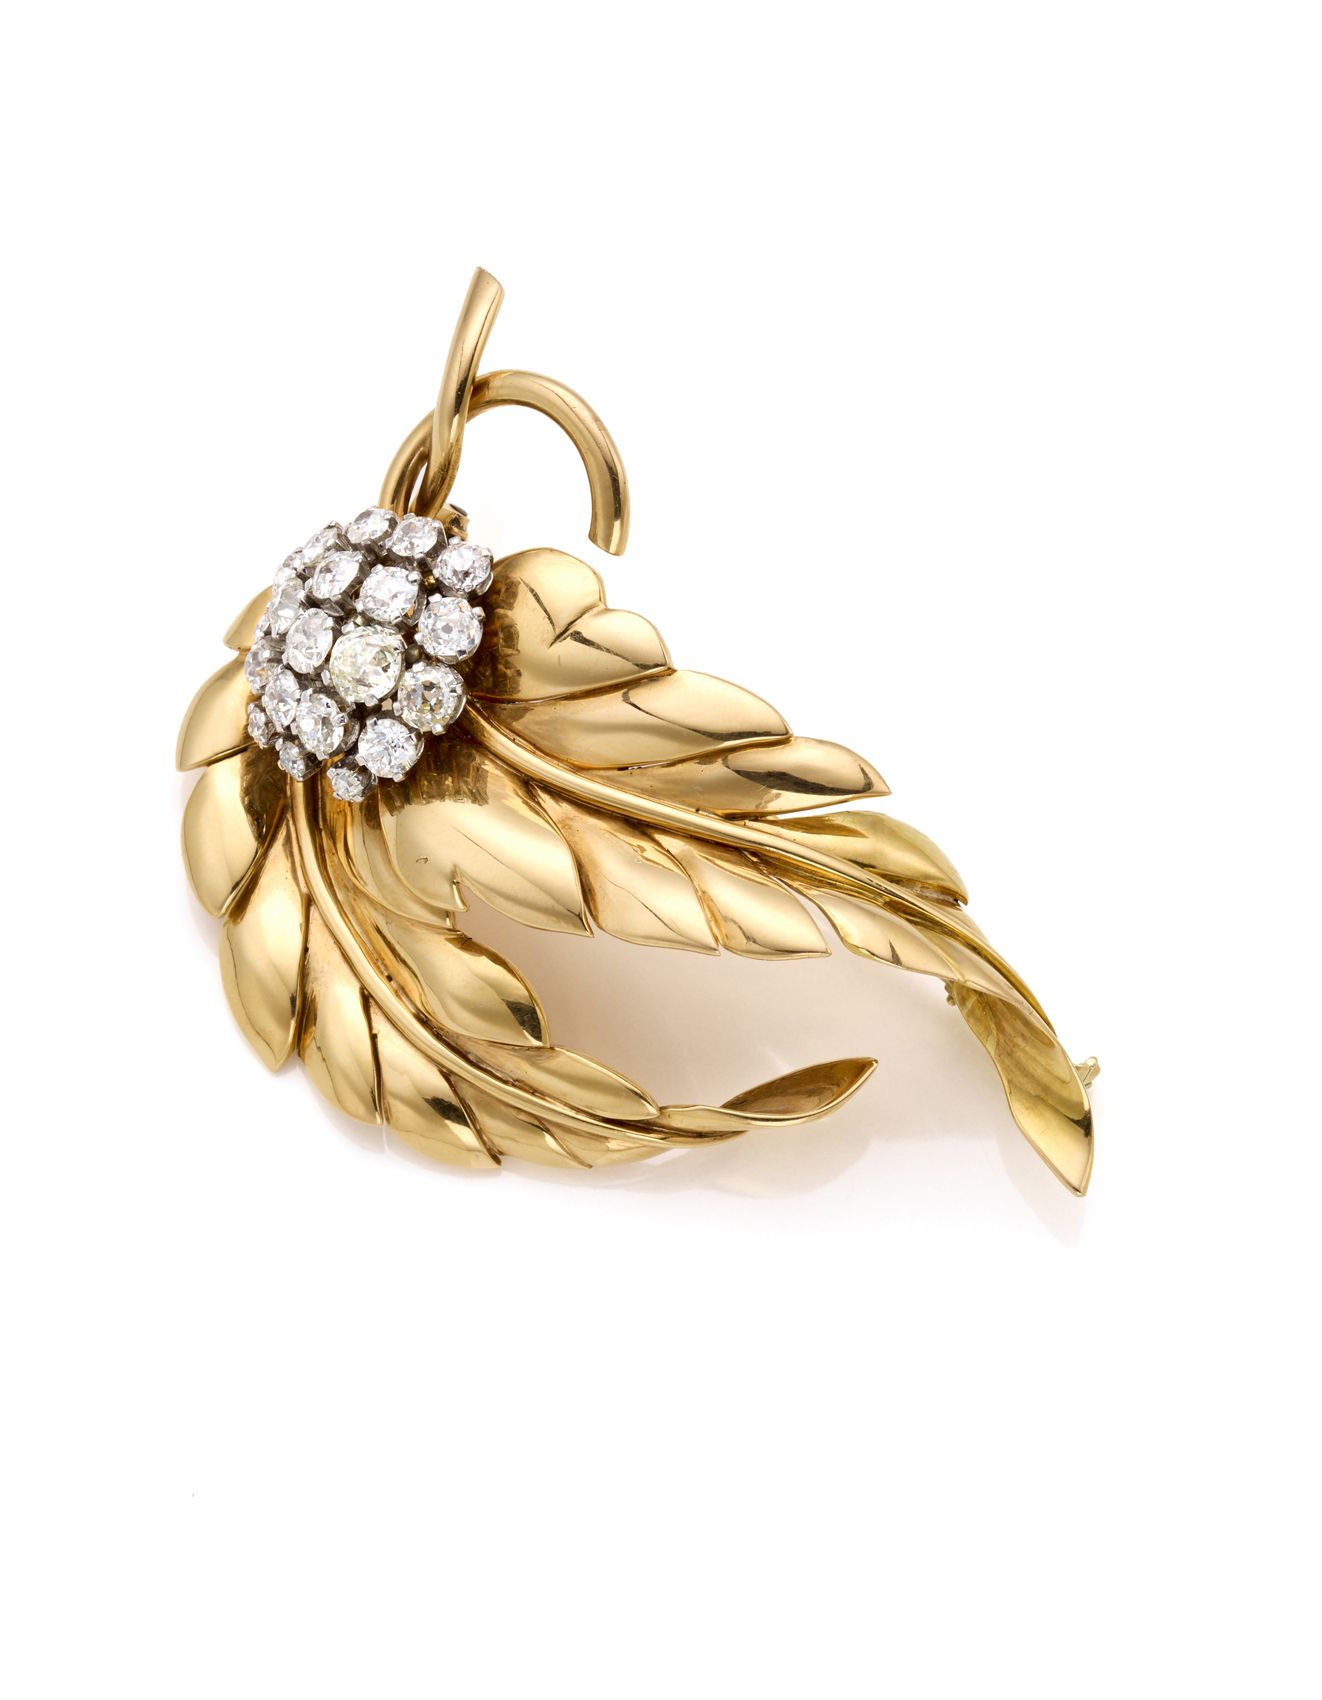 Null Yellow gold and platinum flower shaped brooch accented with old mine diamon&hellip;